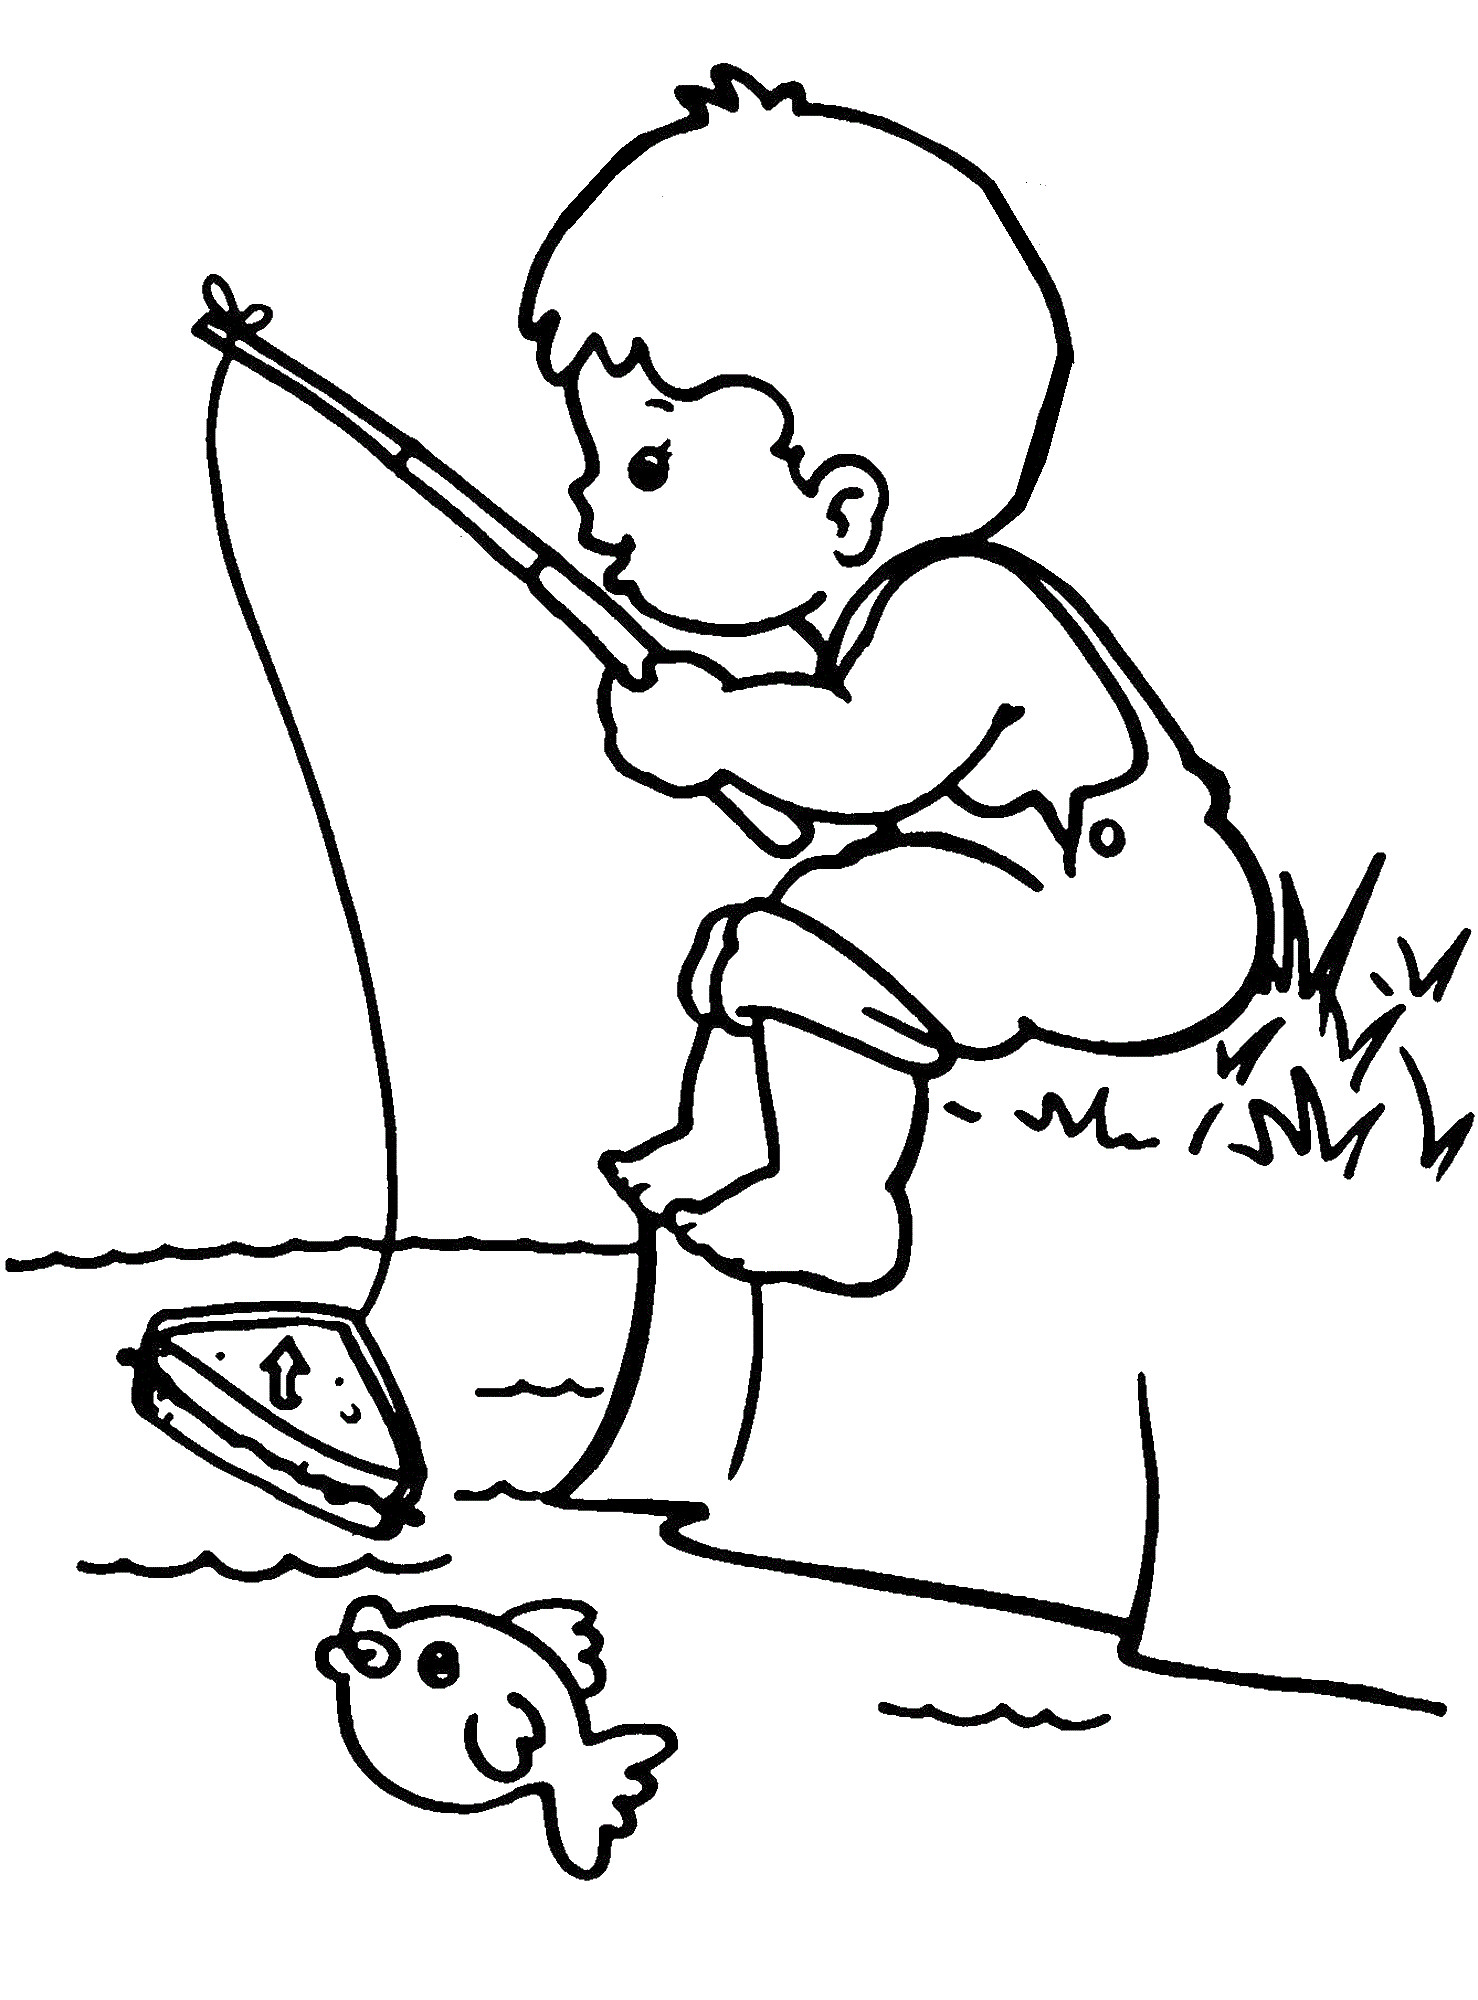 Coloring Sheets For Little Boys
 Fishing Coloring Pages Best Coloring Pages For Kids